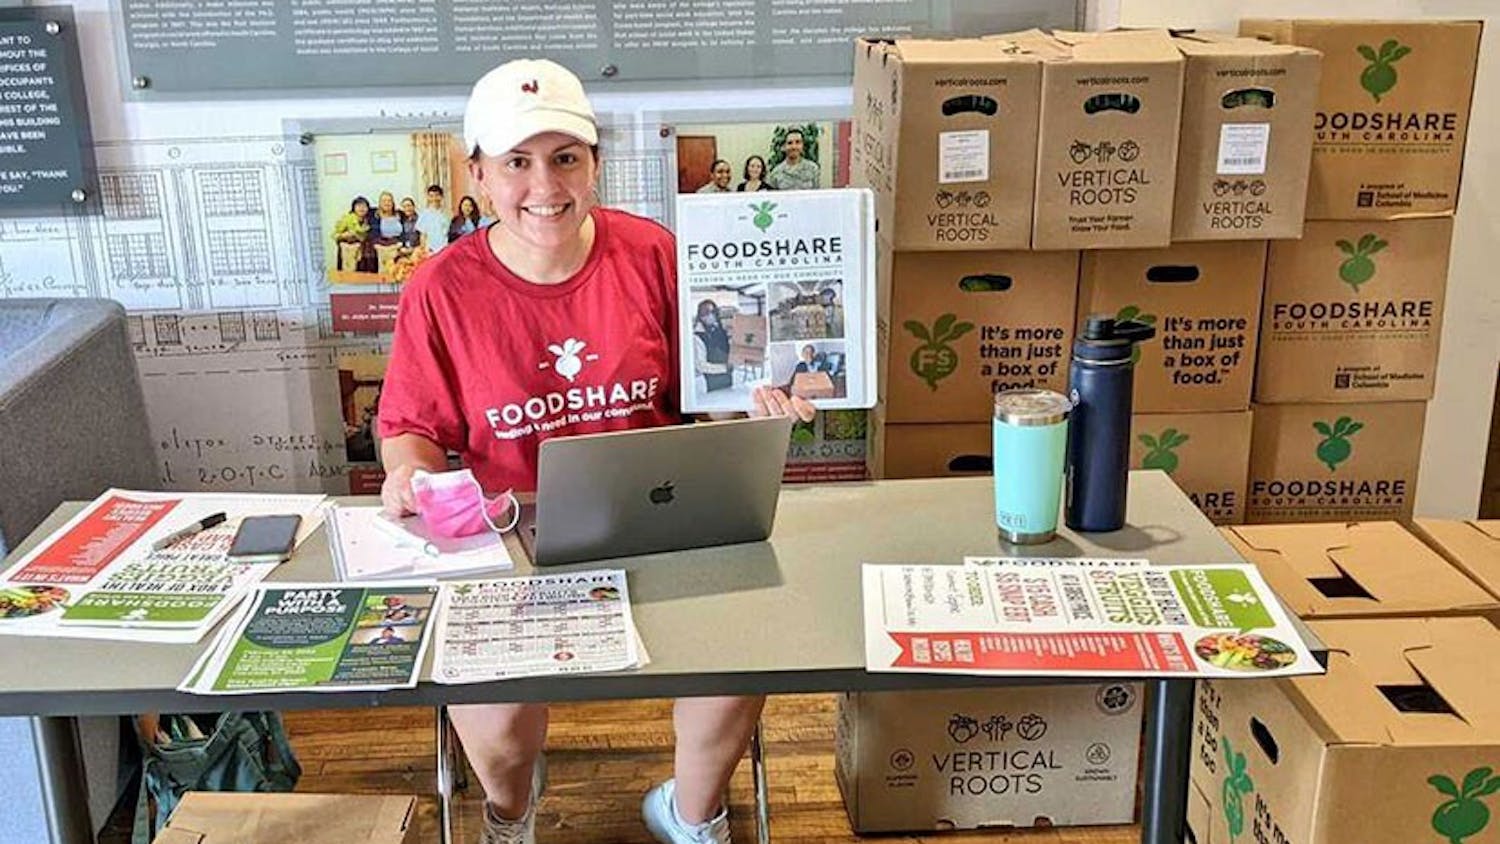 Fourth-year exercise science student Sophie Crosby distributes FoodShare boxes in Hamilton College on Wednesday, Feb. 23, 2022. FoodShare is a program initiated by the USC School of Medicine to increase access to fresh food across the state.